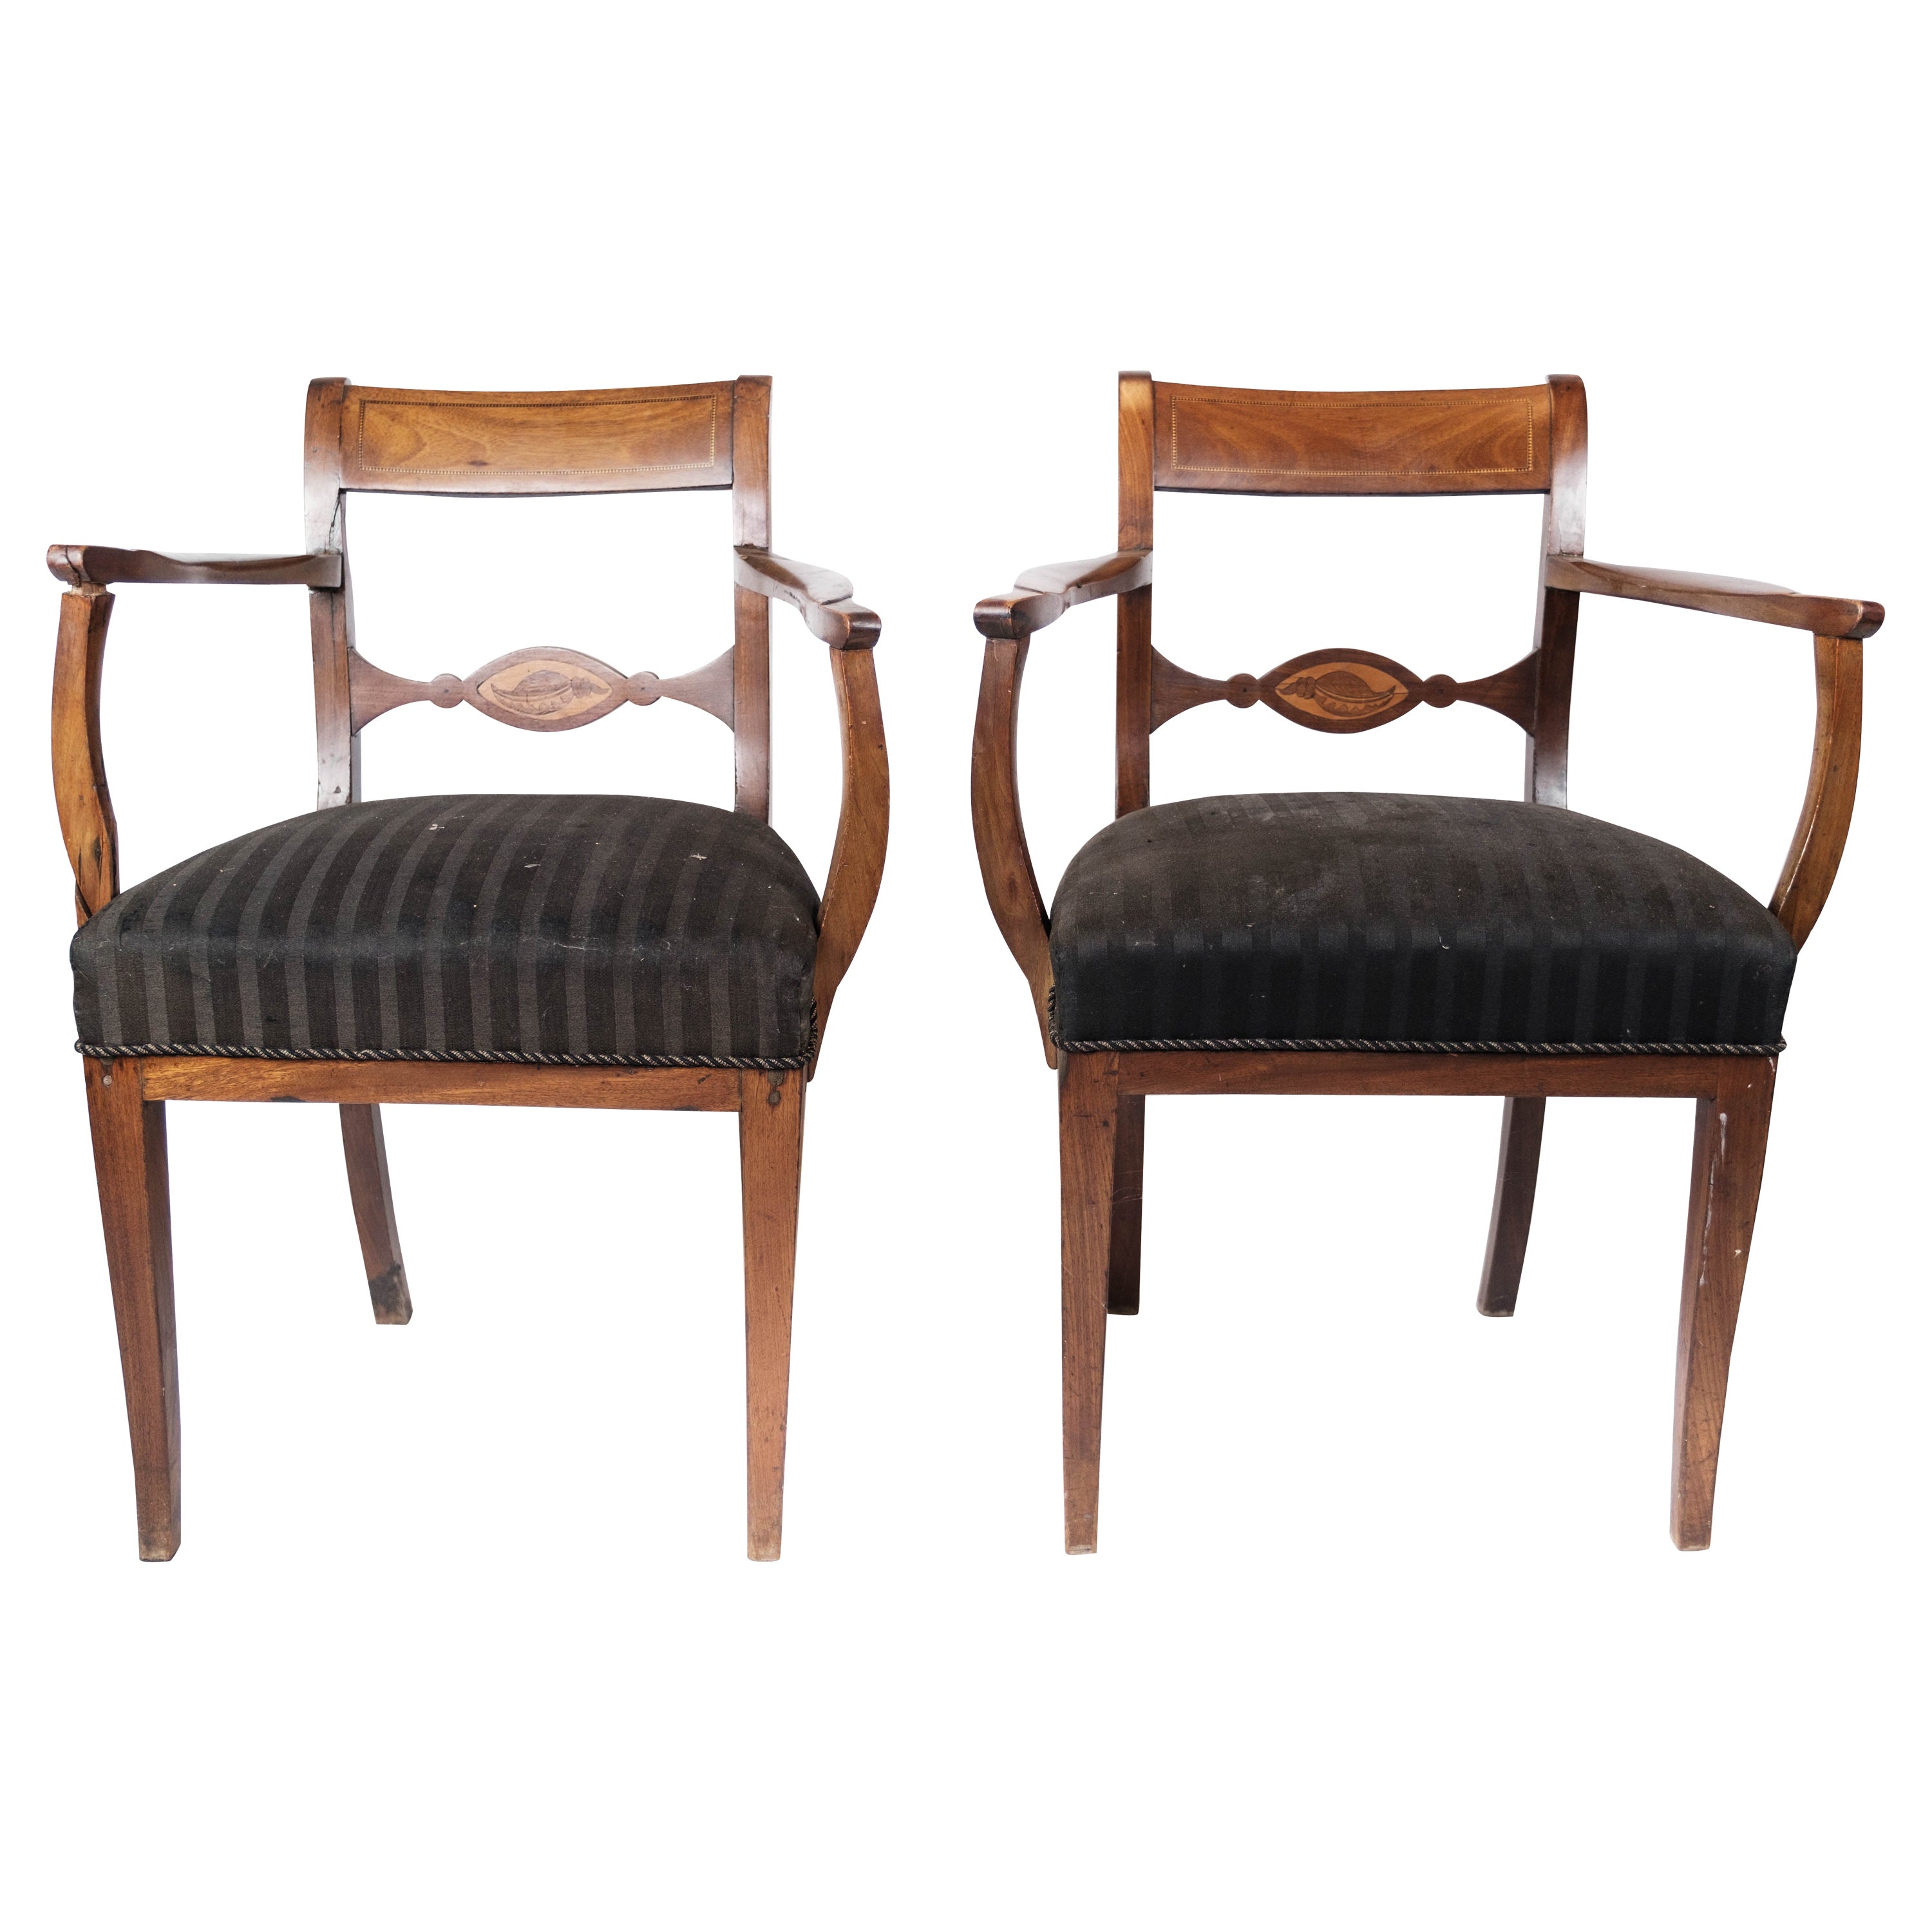 Set of Two Armchairs Made In Mahogany From 1860s